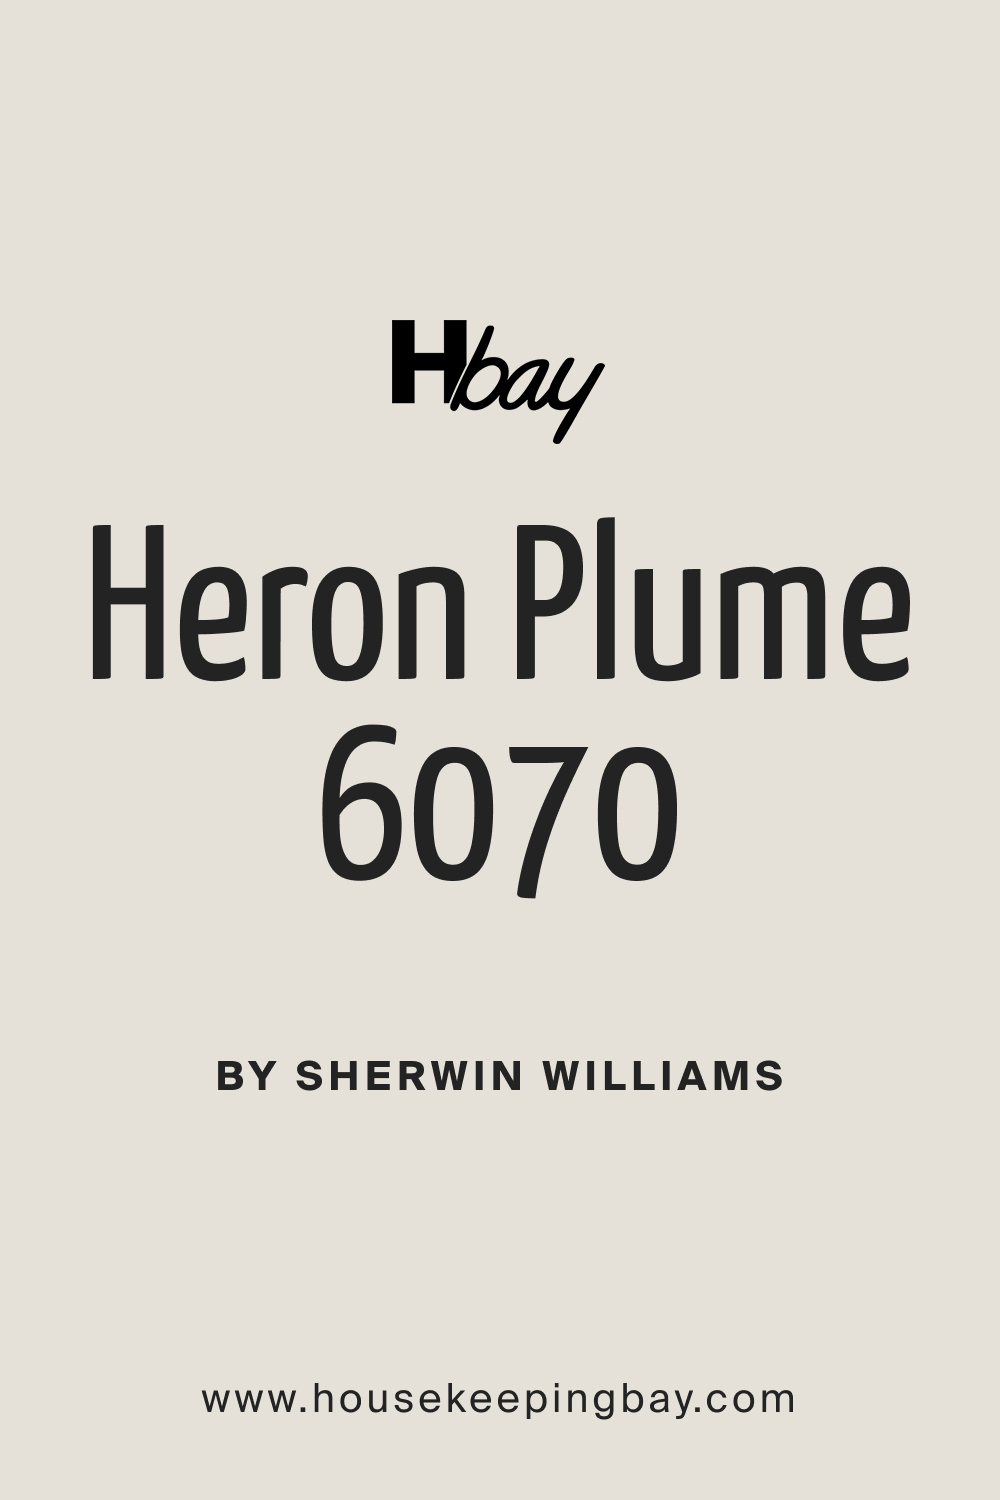 Sherwin Williams SW 6070 Heron Plume Paint Color